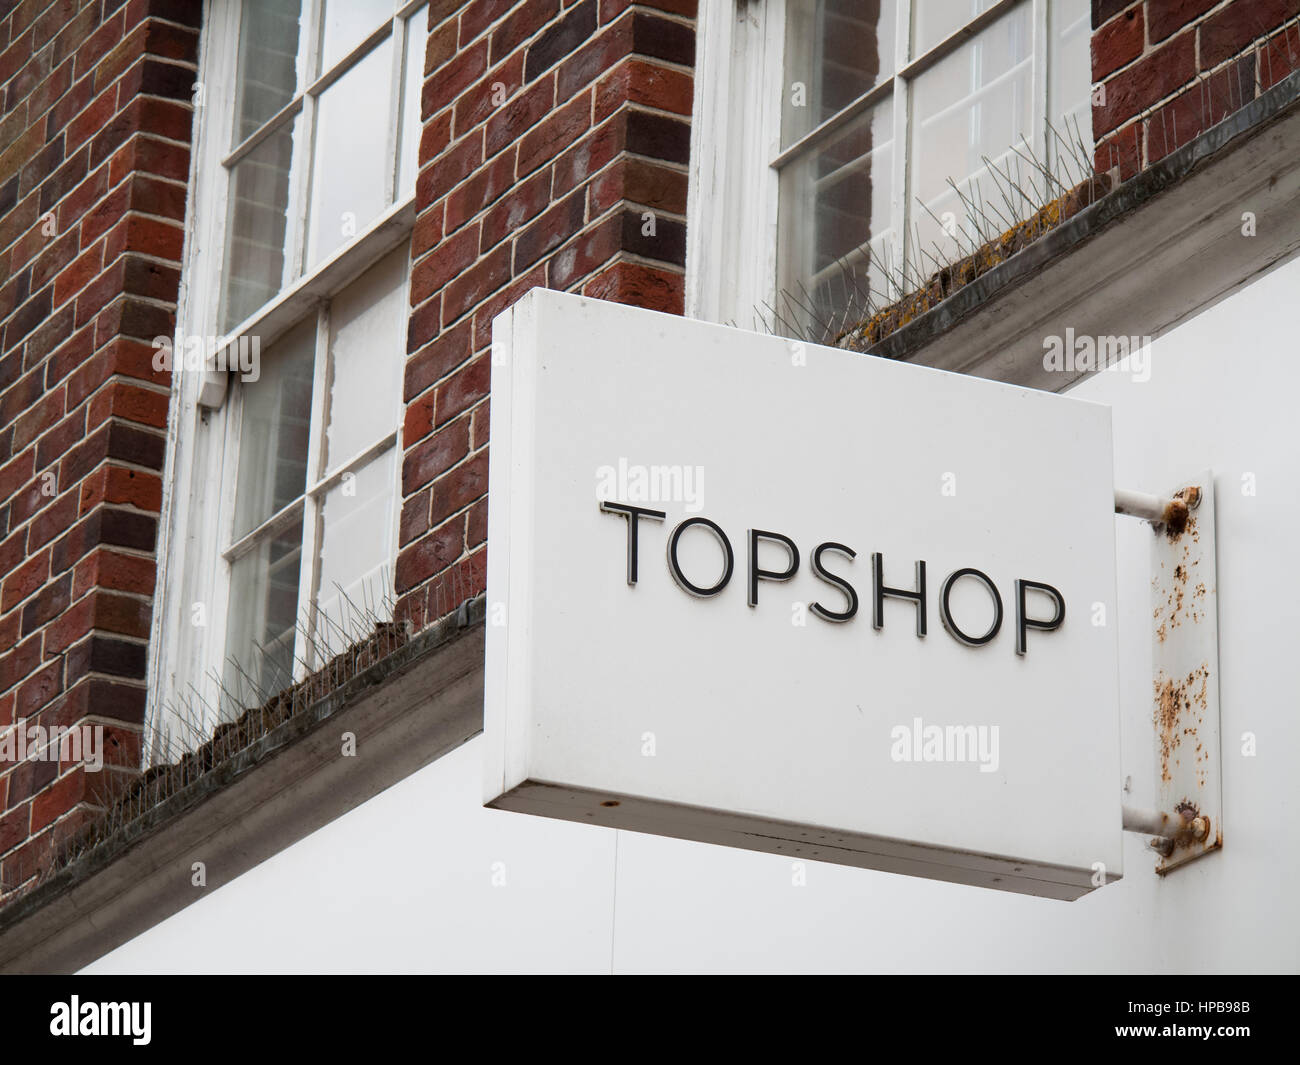 Topshop and Topman ladies and gentlemen high street fashion store, sign over store entrance Stock Photo